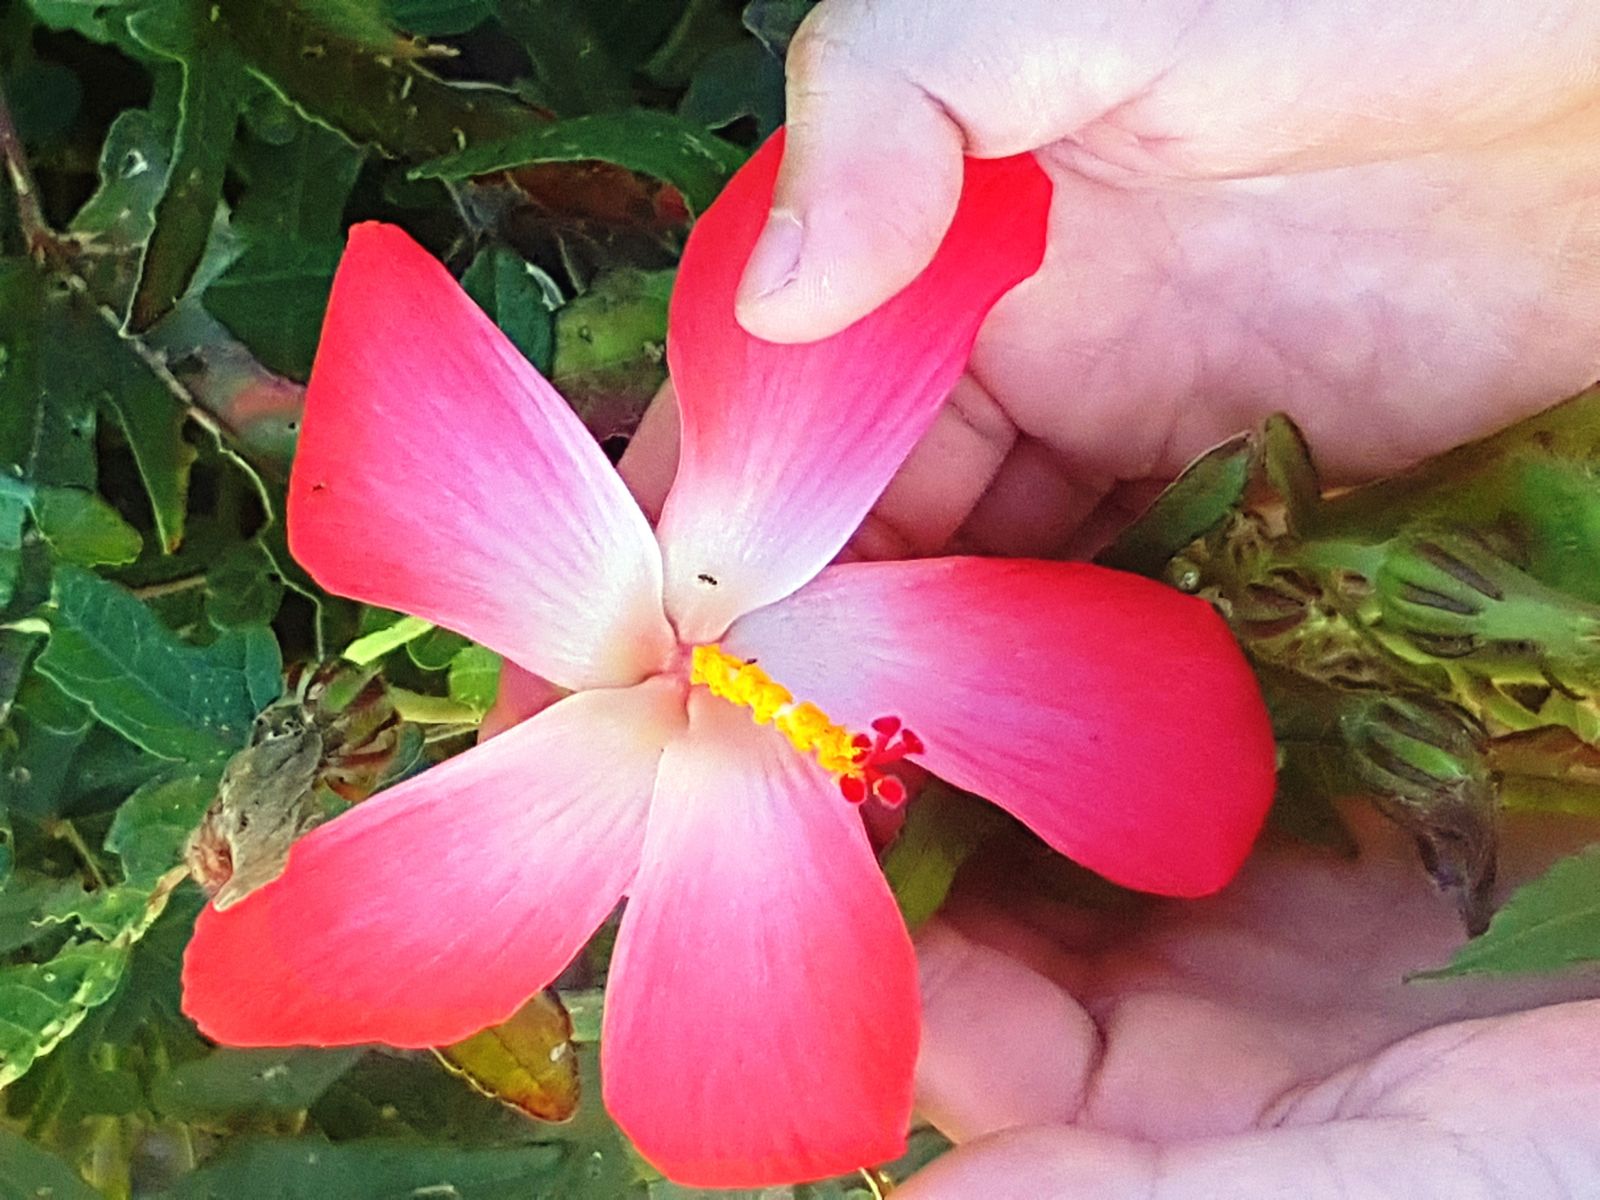 Ginseng flower separately blooming in the leaf axil; it is pink or reddish brown, with a little yellow tint